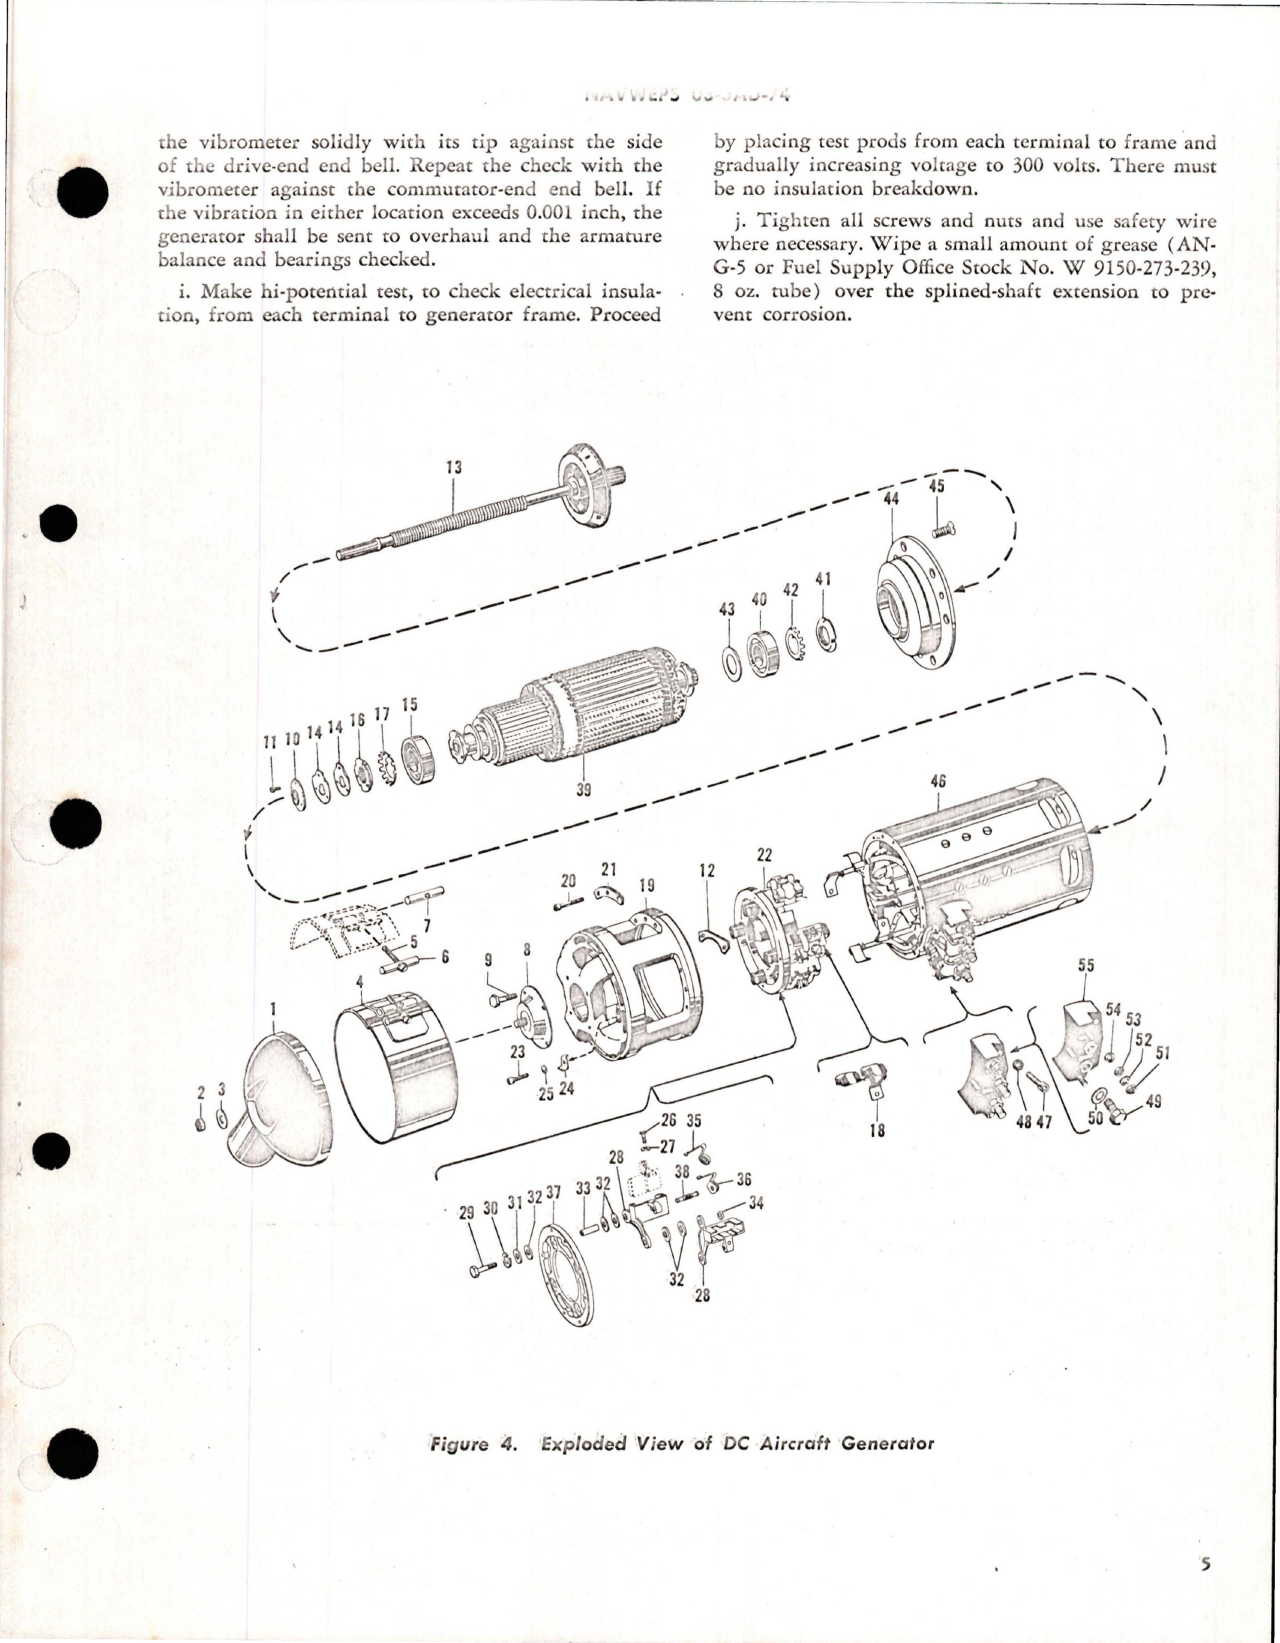 Sample page 5 from AirCorps Library document: Overhaul Instructions with Parts for Direct Current Aircraft Generator - Models 2CM73C4 and 2CM73C4A 